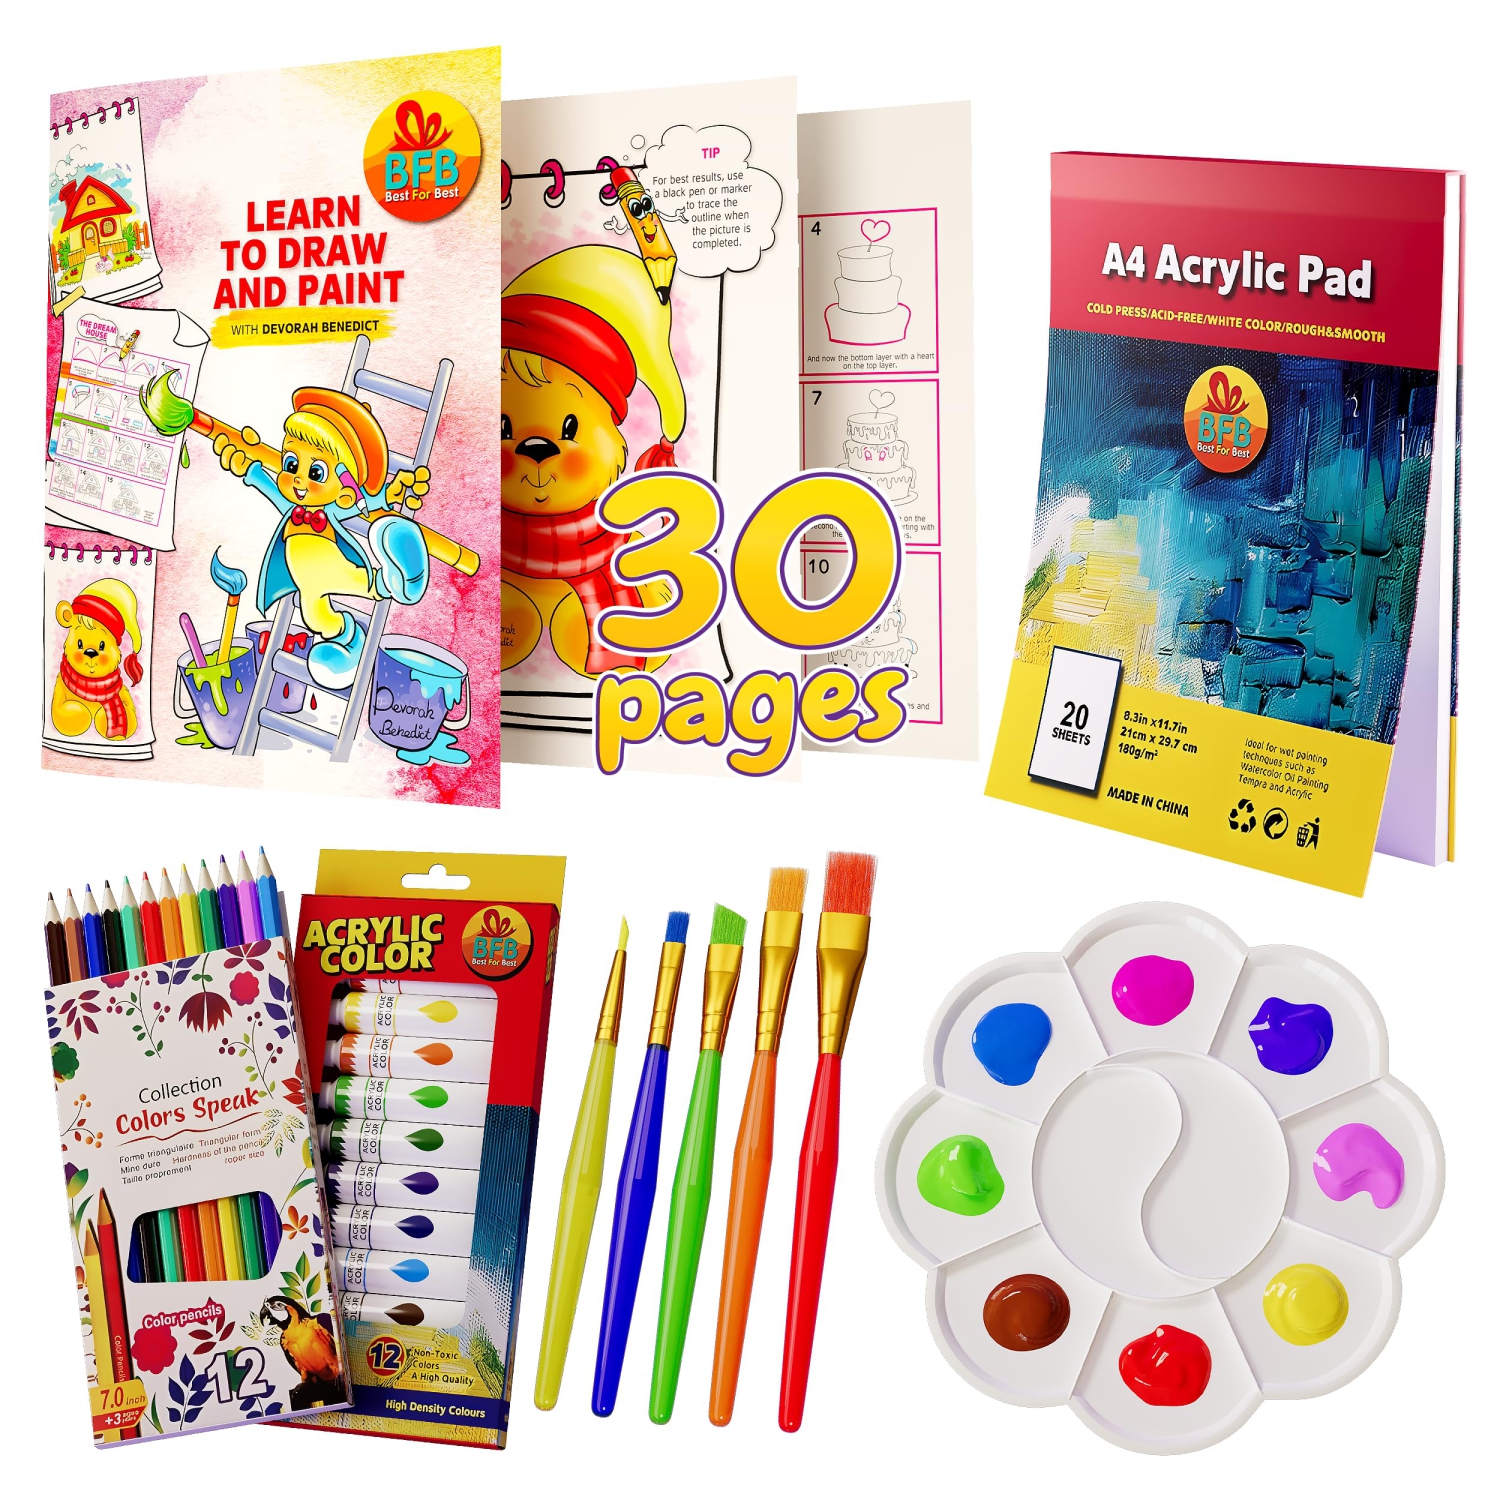 Artistic Adventures: Kids Paint Set with Learn How to Draw Booklet - 32PCS Painting Supplies Kit for Children, Premium Canvas Paint Set for Kids 7+ - Boost Creativity and Fun!